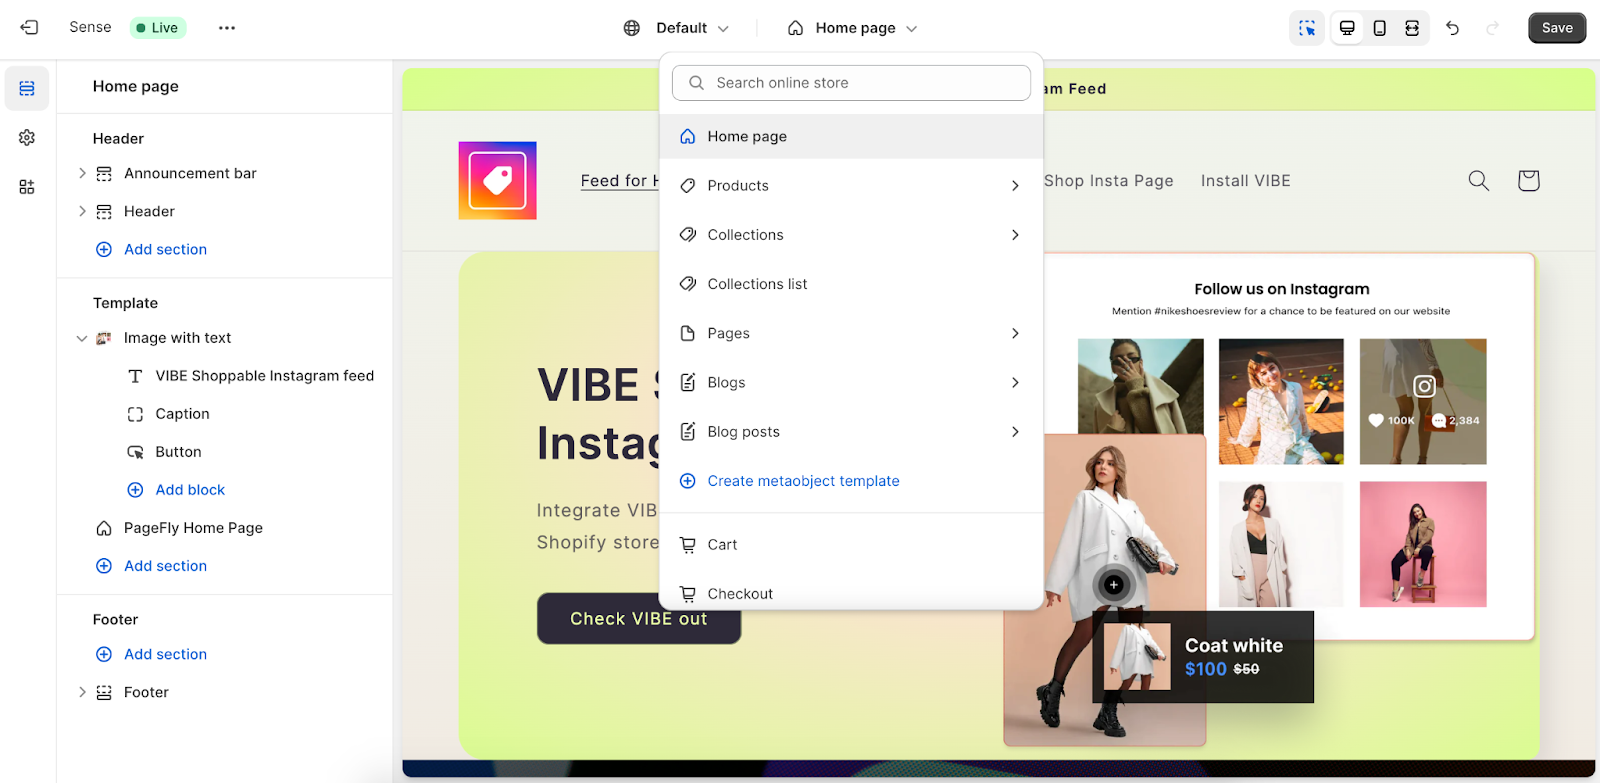 Use VIBE Shoppable Instagram Feed in Shopify theme